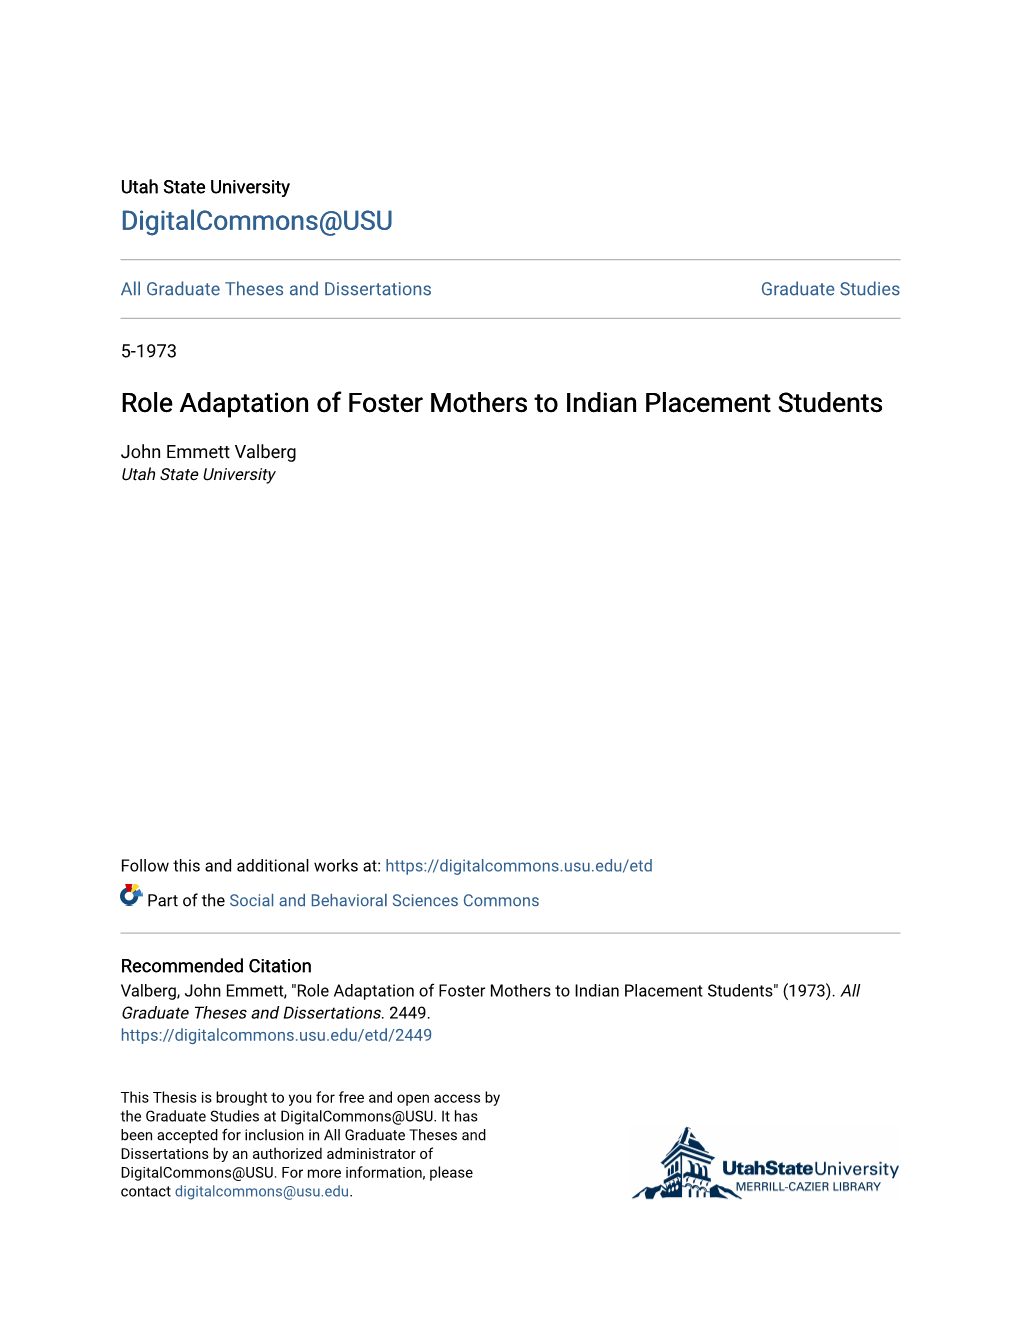 Role Adaptation of Foster Mothers to Indian Placement Students